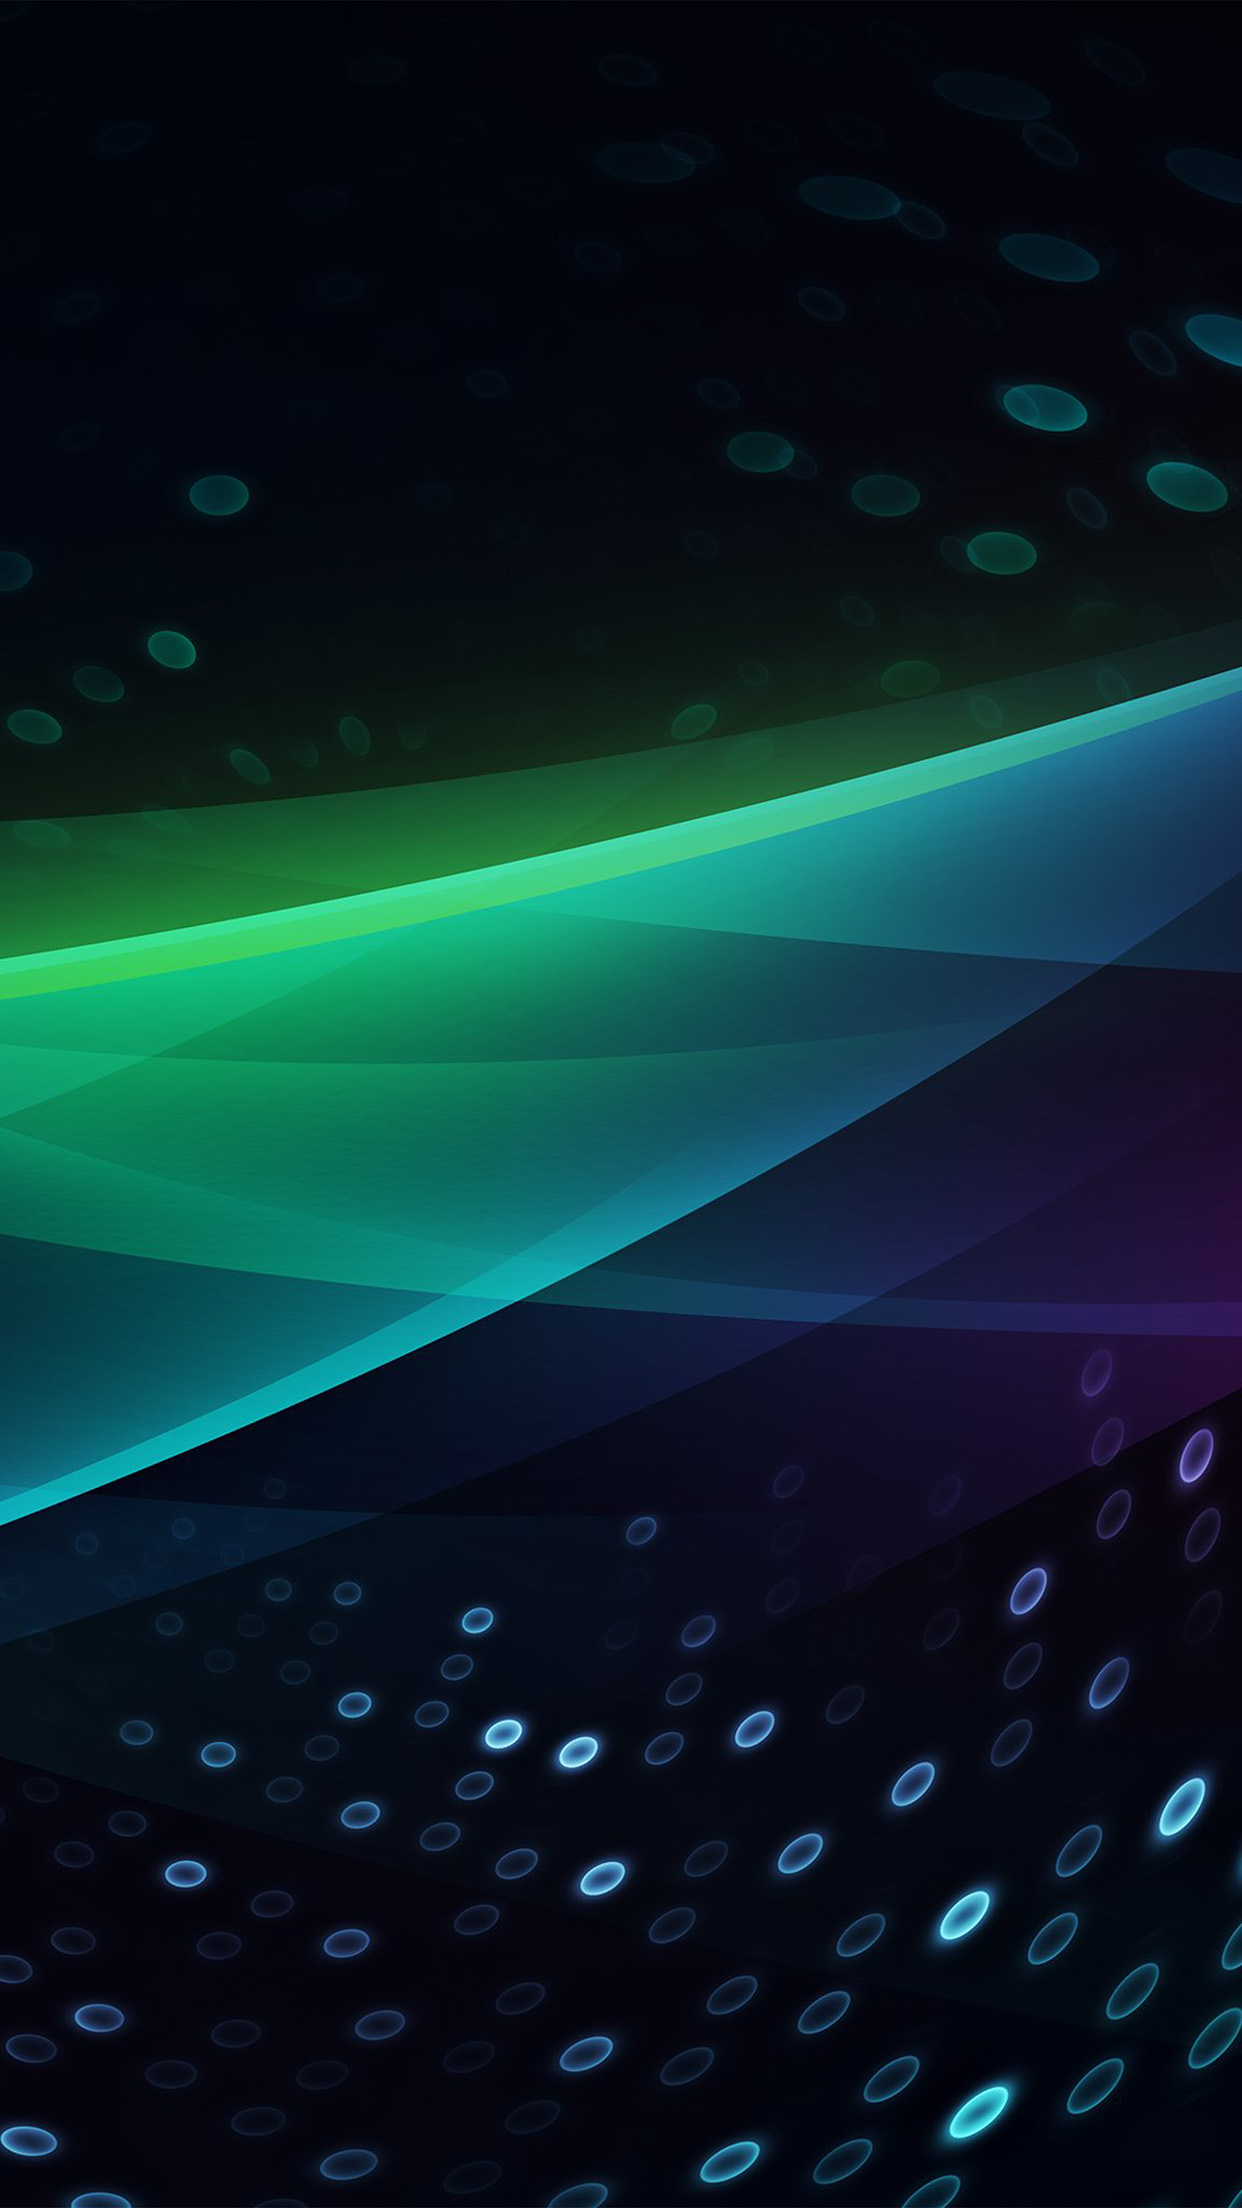 Digital Abstract Pattern Android wallpaper